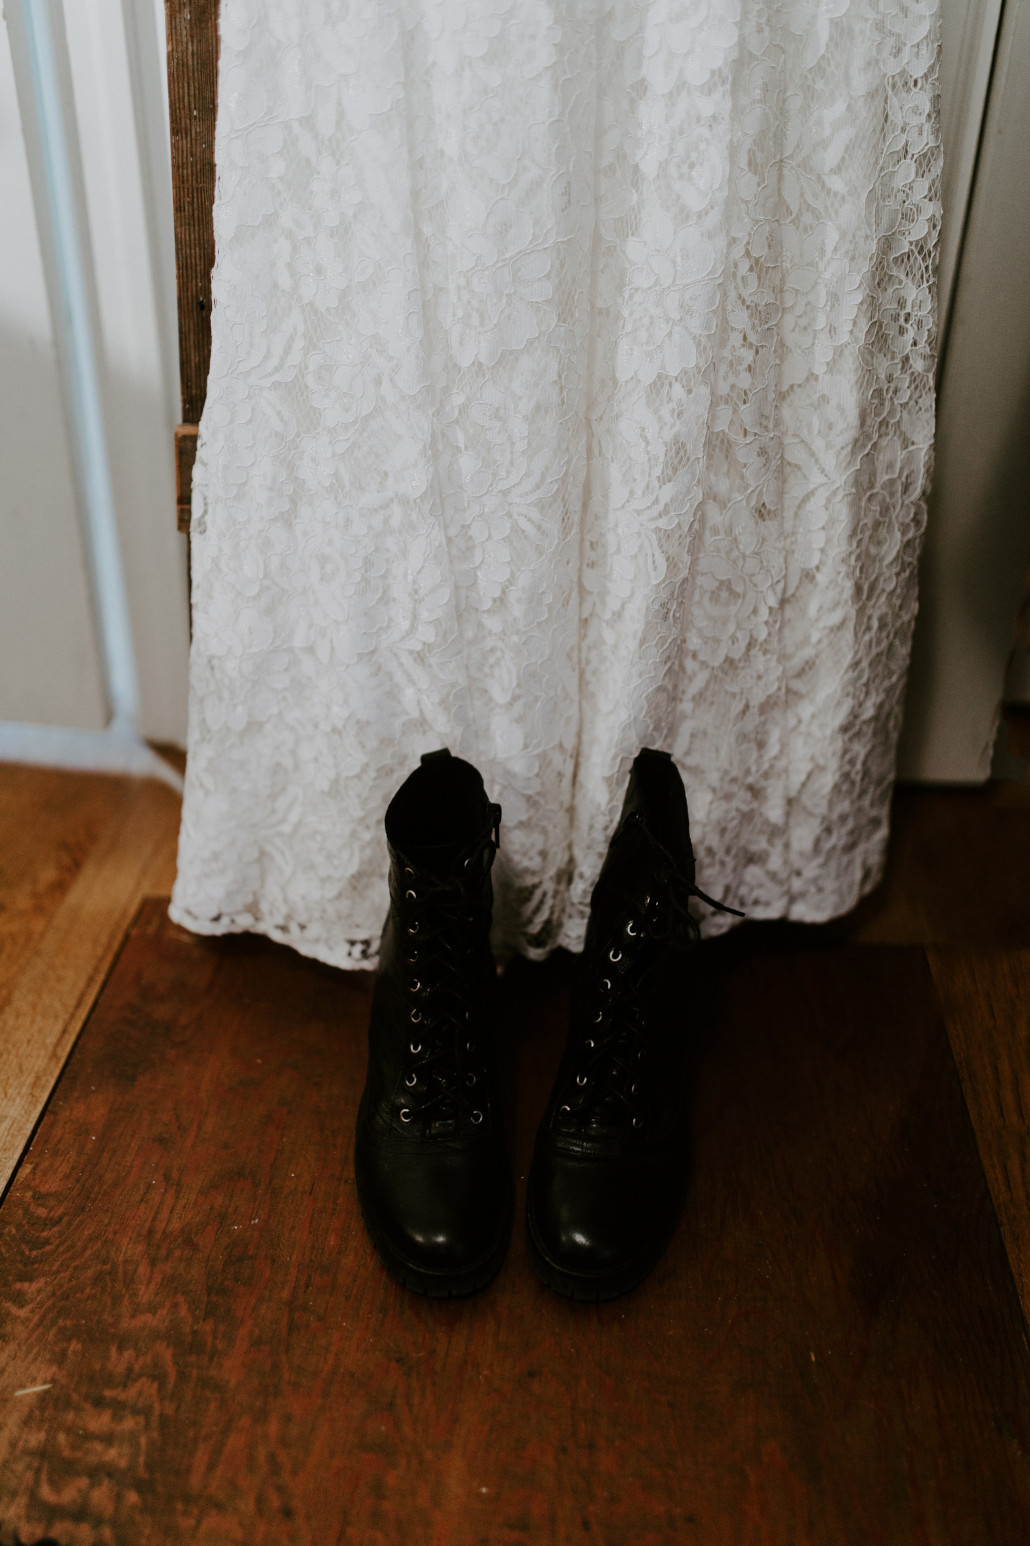 Nicole's shoes. Elopement wedding photography at Cannon Beach by Sienna Plus Josh.